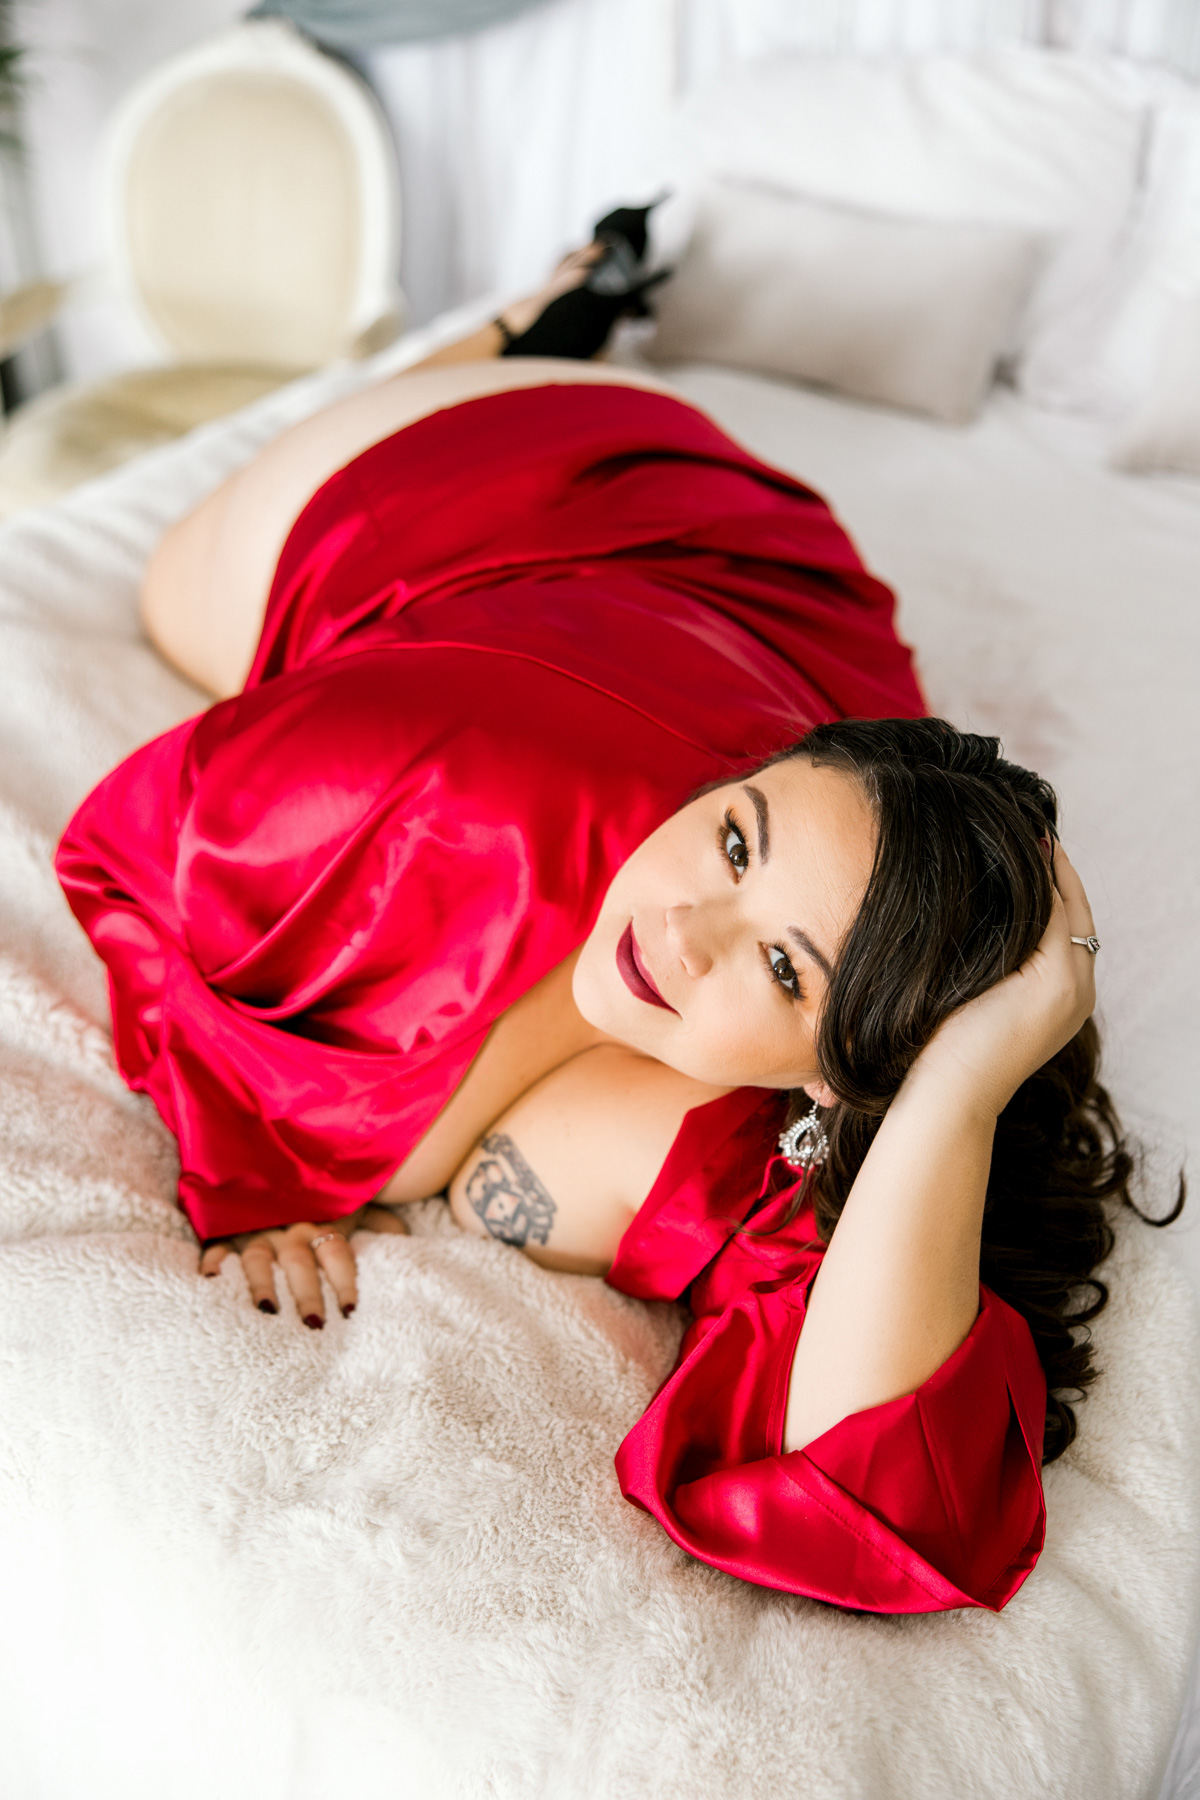 brunette on bed tattoo on chest laying down wearing red satin robe